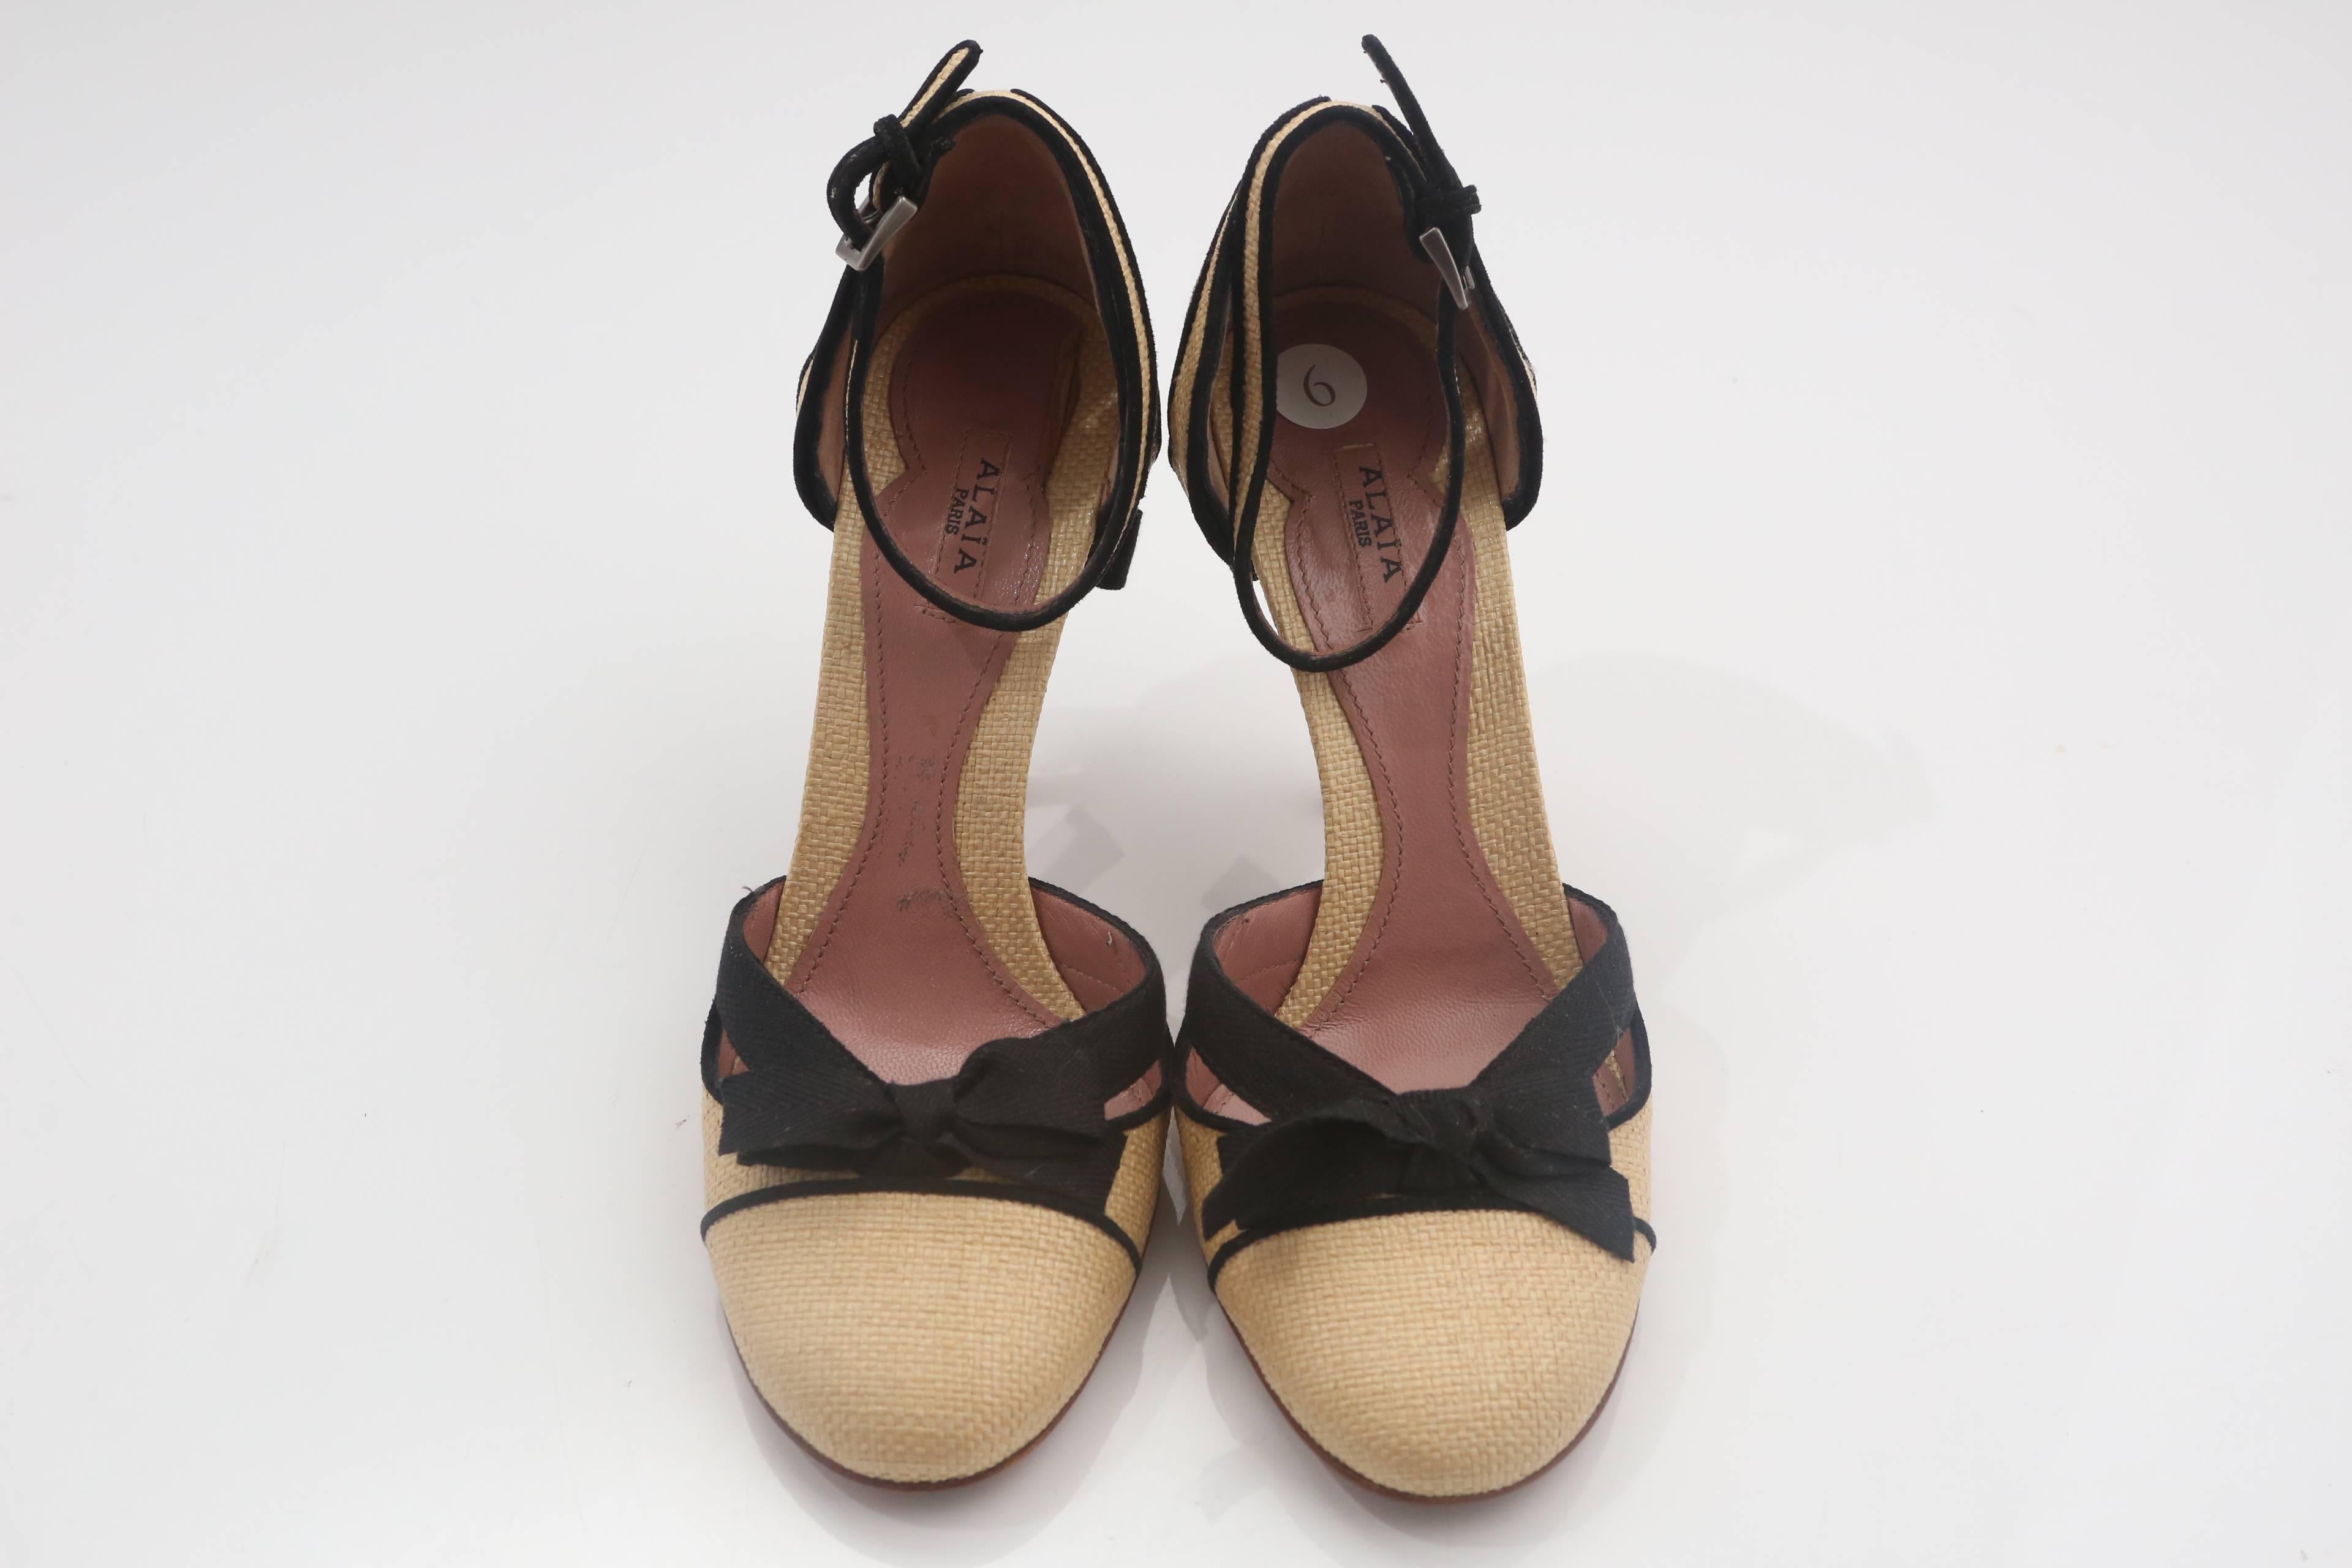 Alaia Linen and Black MaryJane Shoes with Bow bows at front and heel. Shoe features black piping and ankle strap closure.  